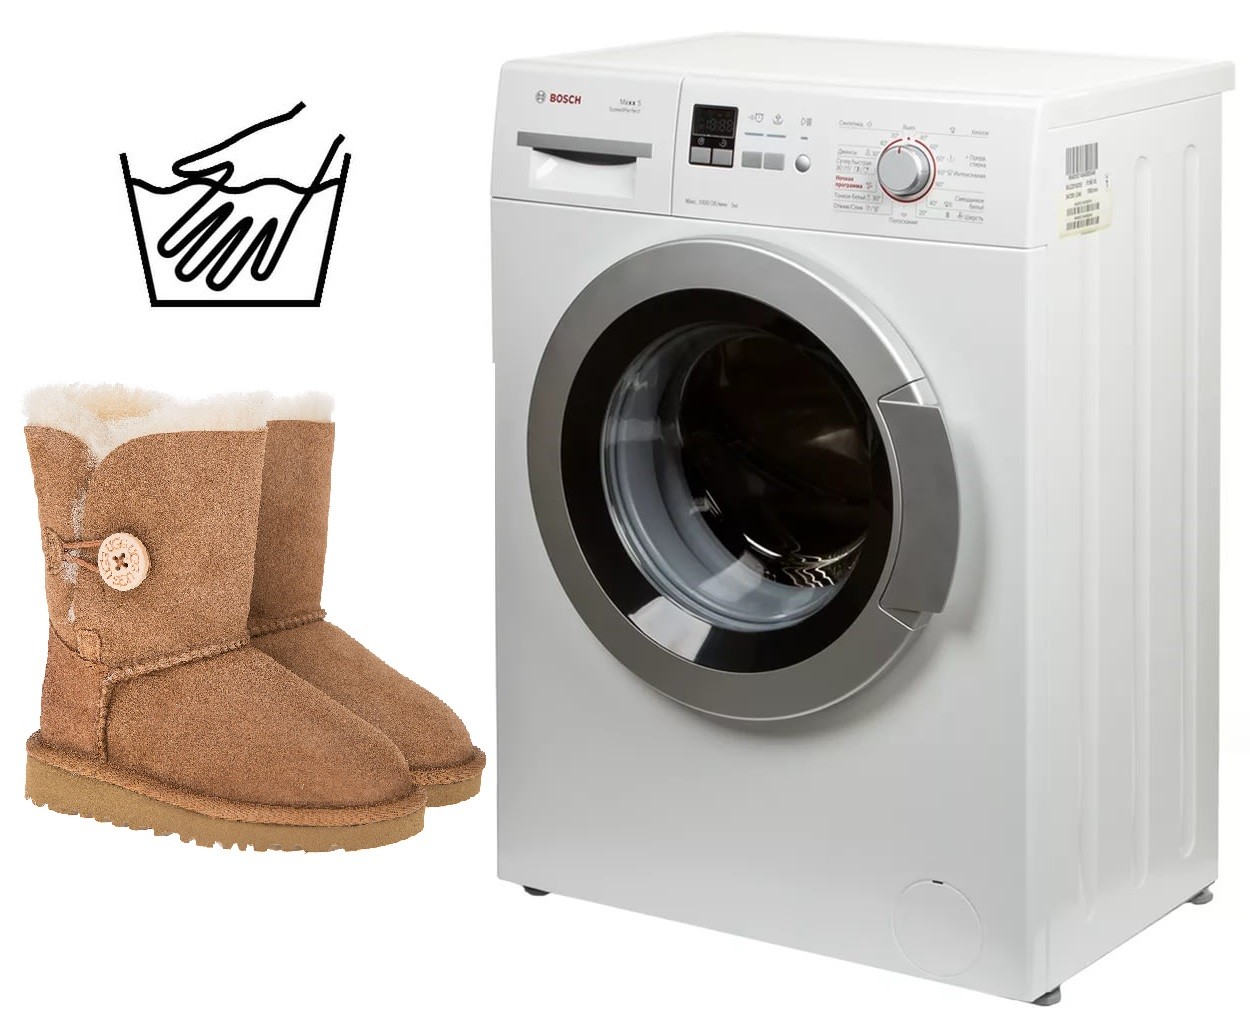 How to wash ugg boots in a washing machine